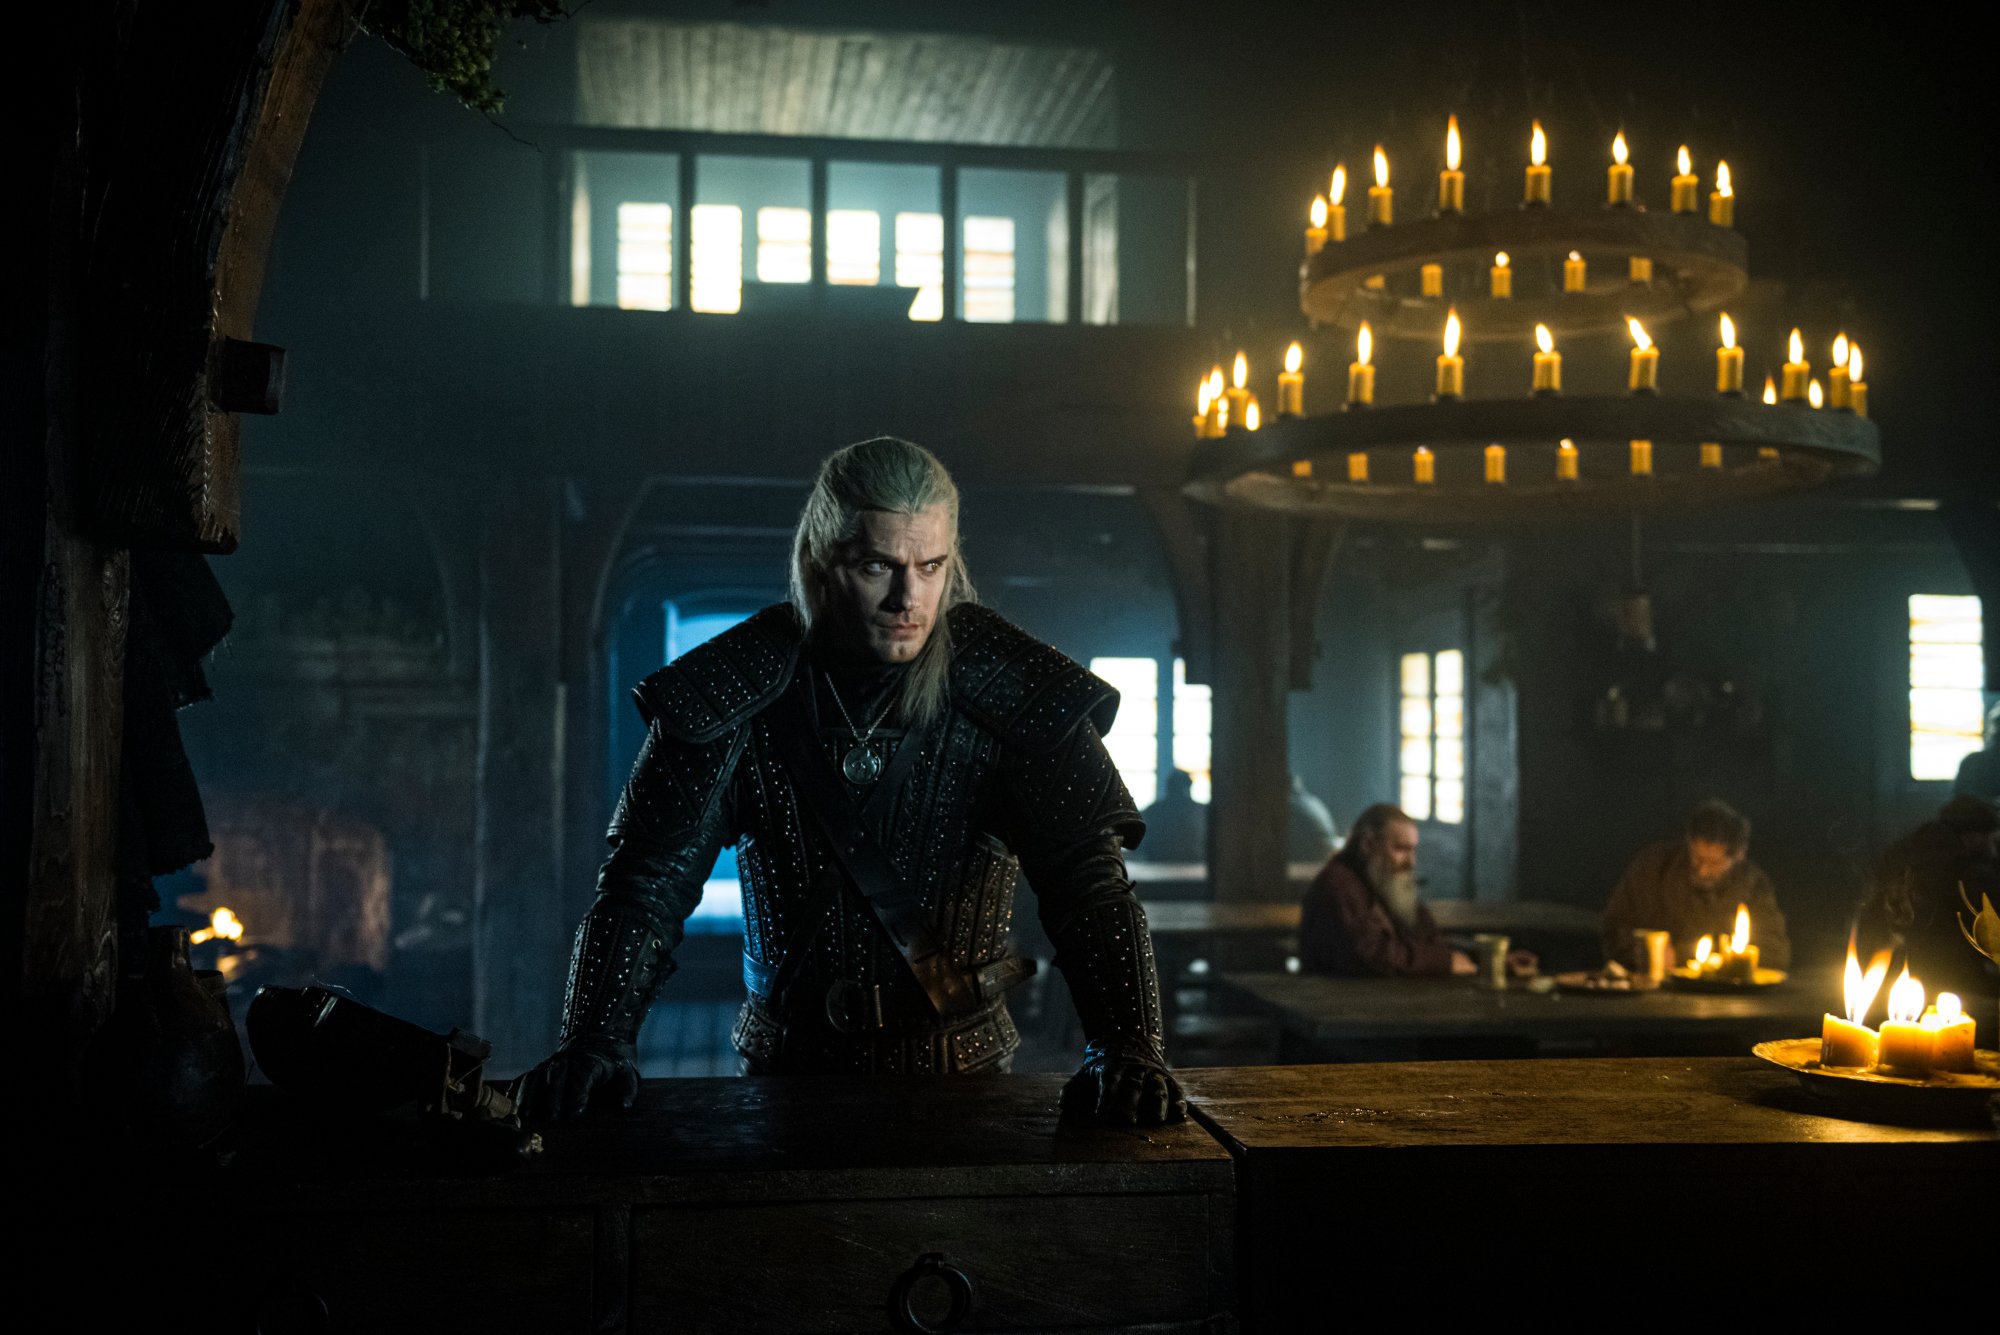 Henry Cavill as Geralt of Rivia in Netflix's 'The Witcher,' which hasn't yet been renewed for season 3. He stands wearing black leather and leaning on a table. Behind him are men eating and a chandelier. This takes place after his bathtub scene in season 1.